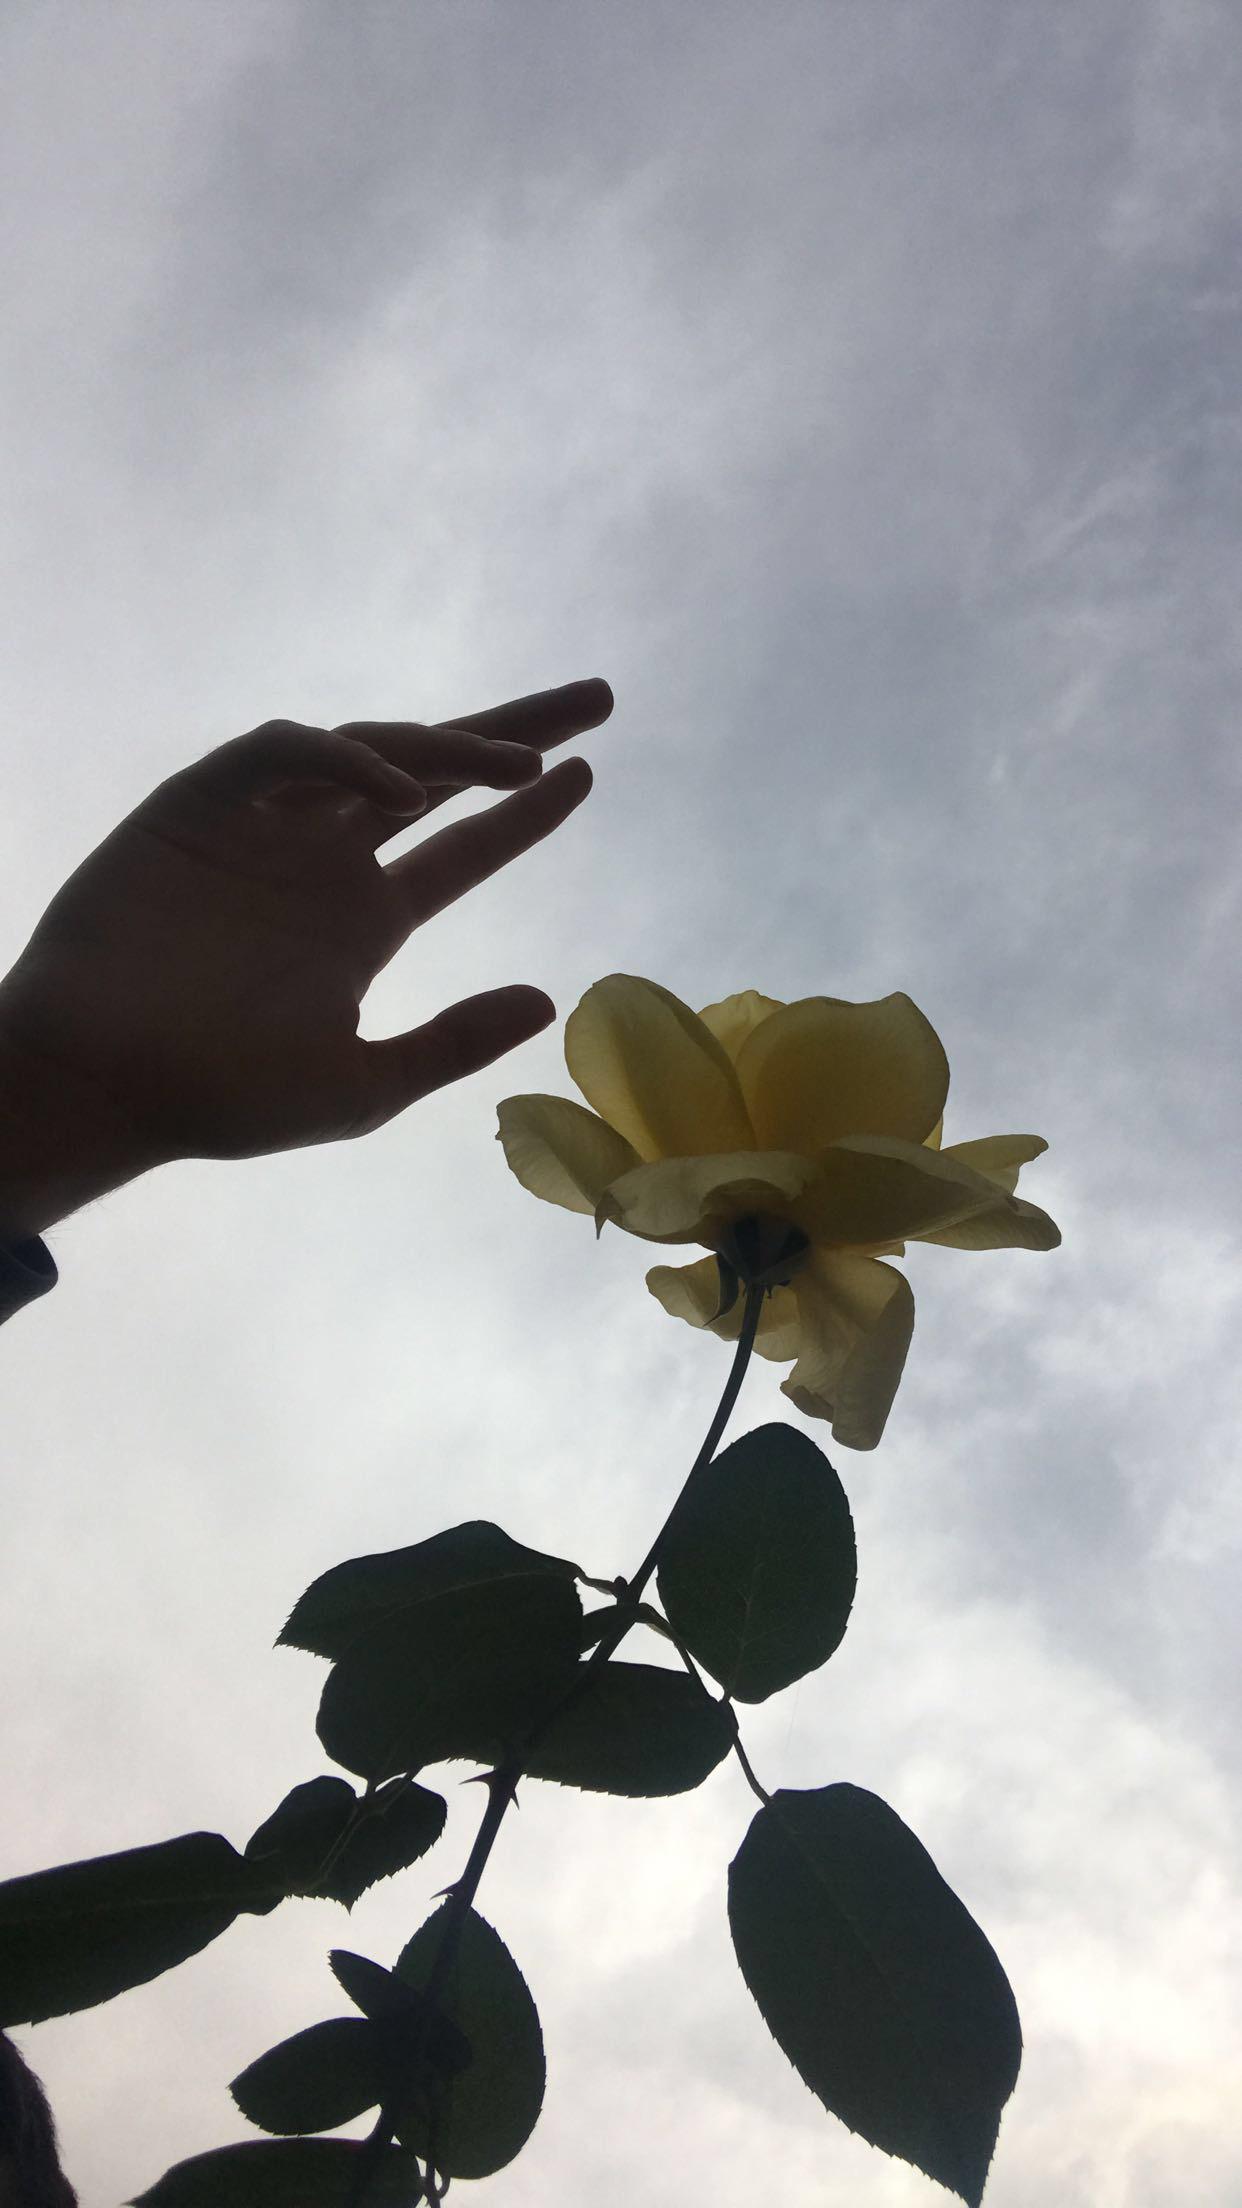 A hand reaching for a yellow rose against a cloudy sky. - Photography